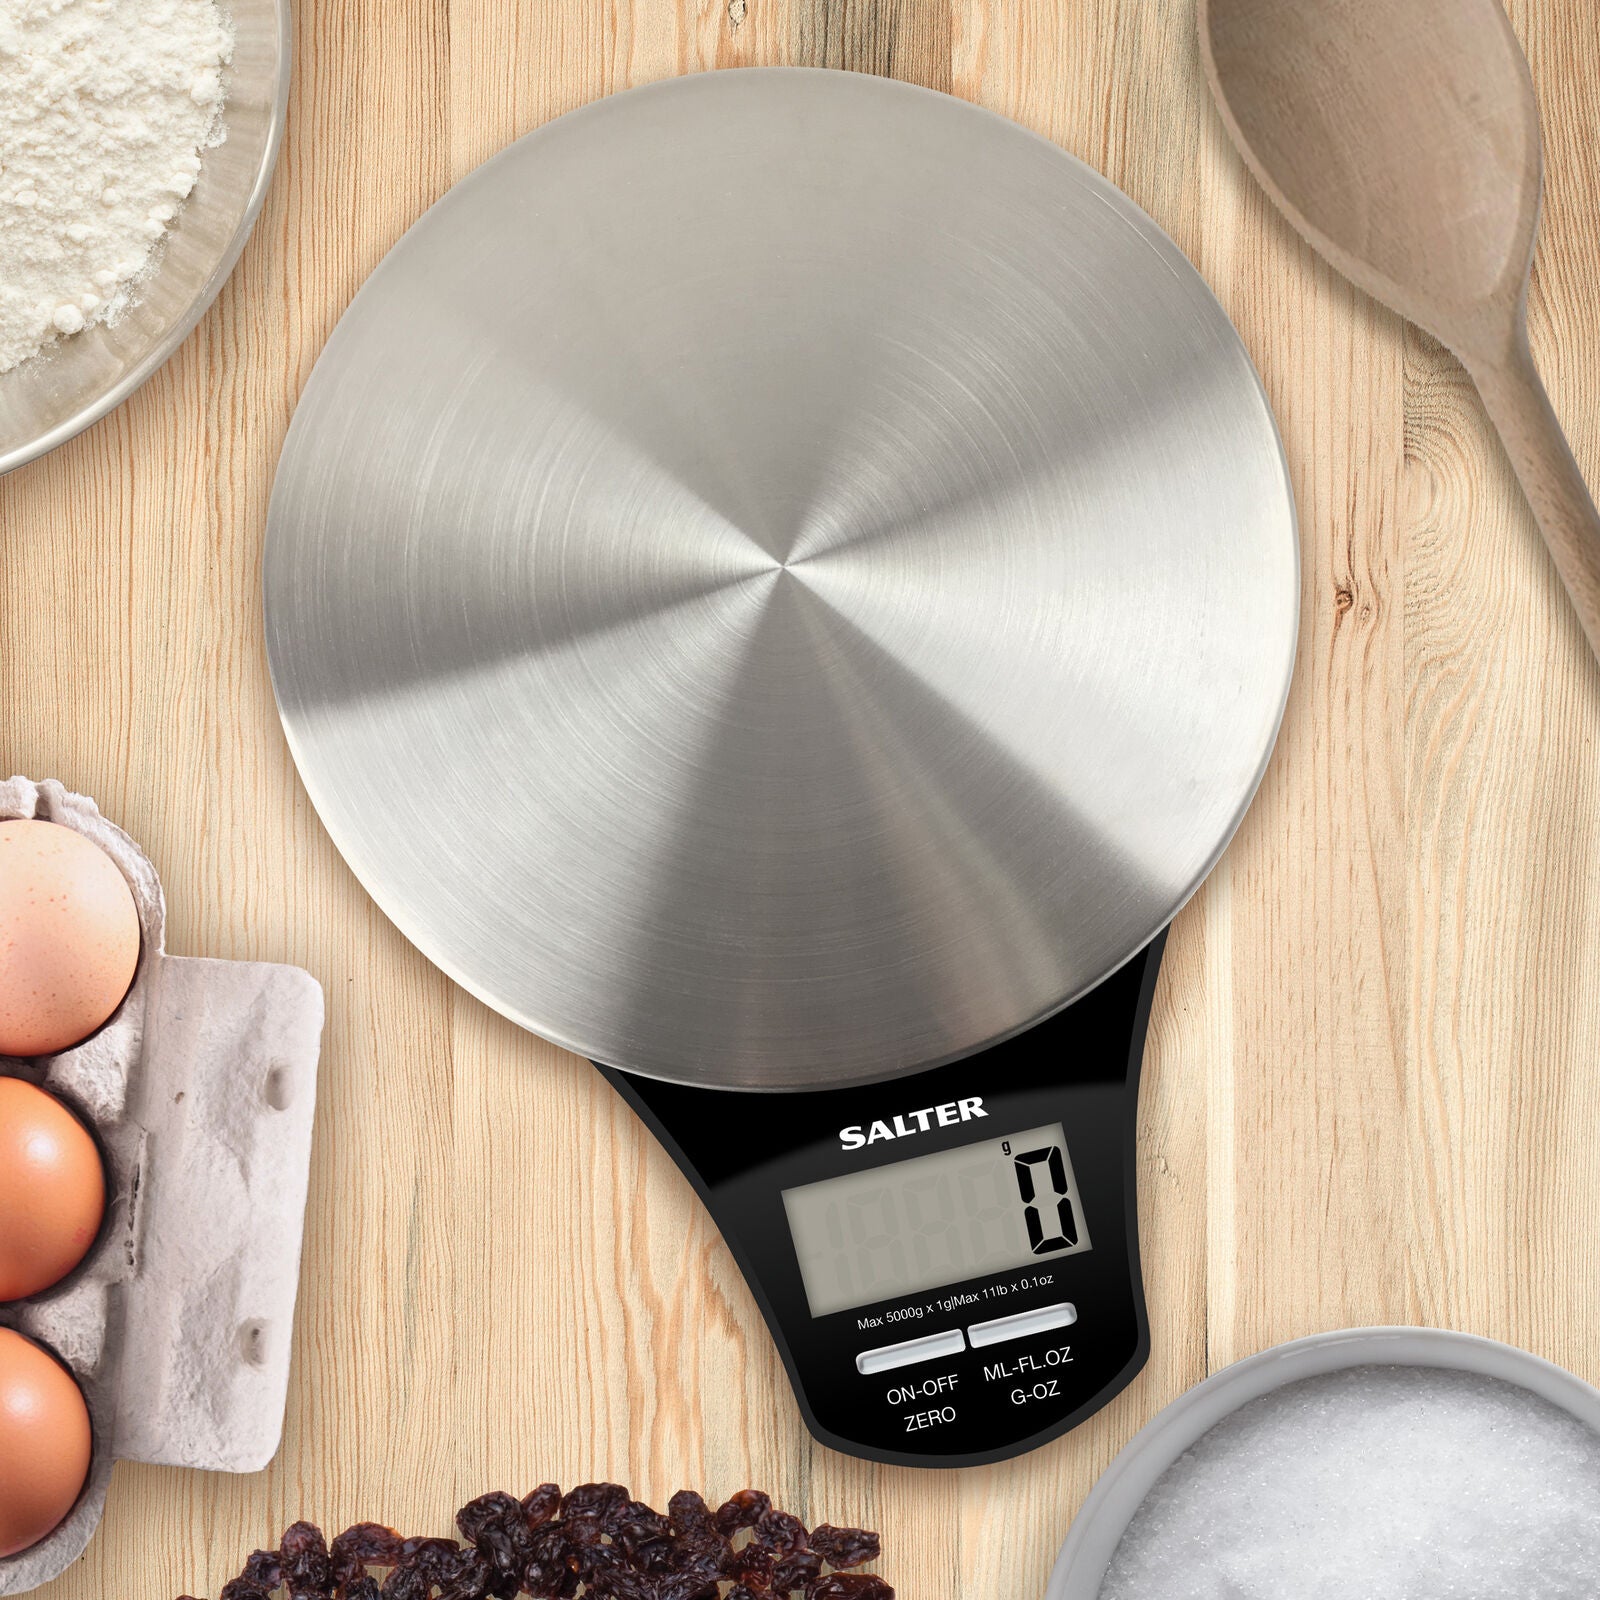 Electronic Kitchen Scale - Black & Silver ColorCan Holds 5 KG